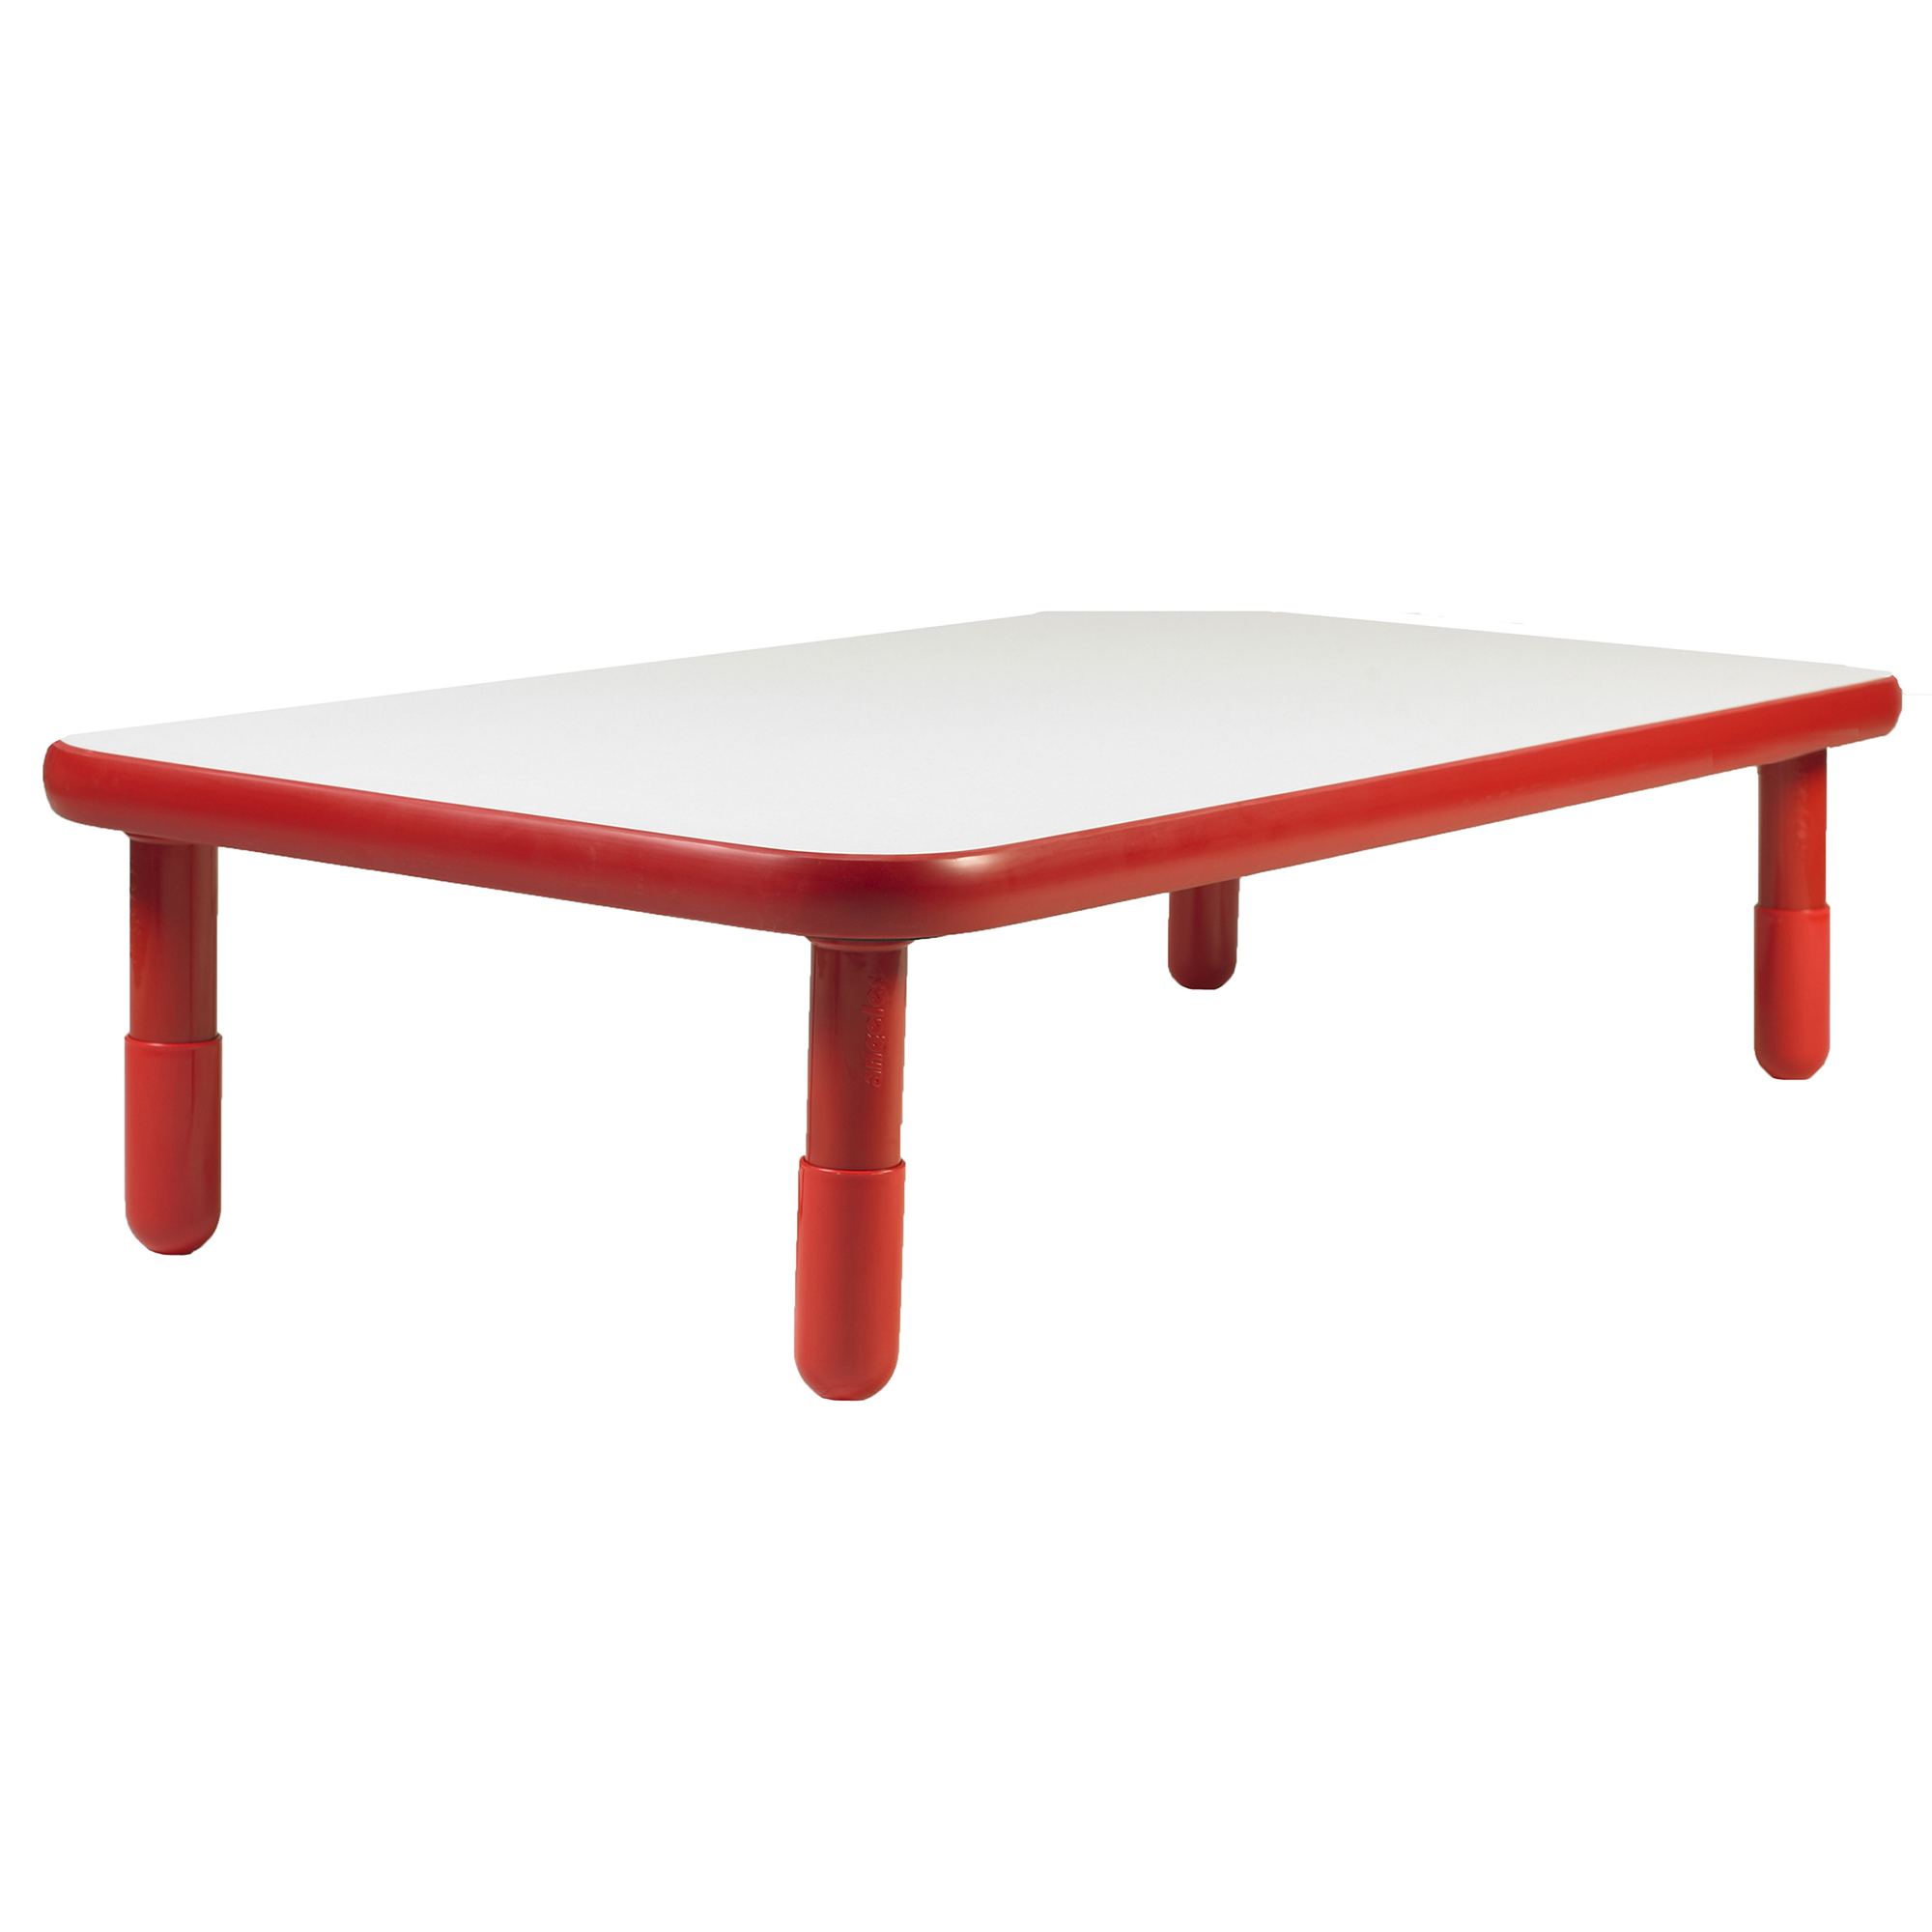 BaseLine® 152,5 cm  x 76 cm  Rectangular Table - Candy Apple Red with 35,5 cm  Legs